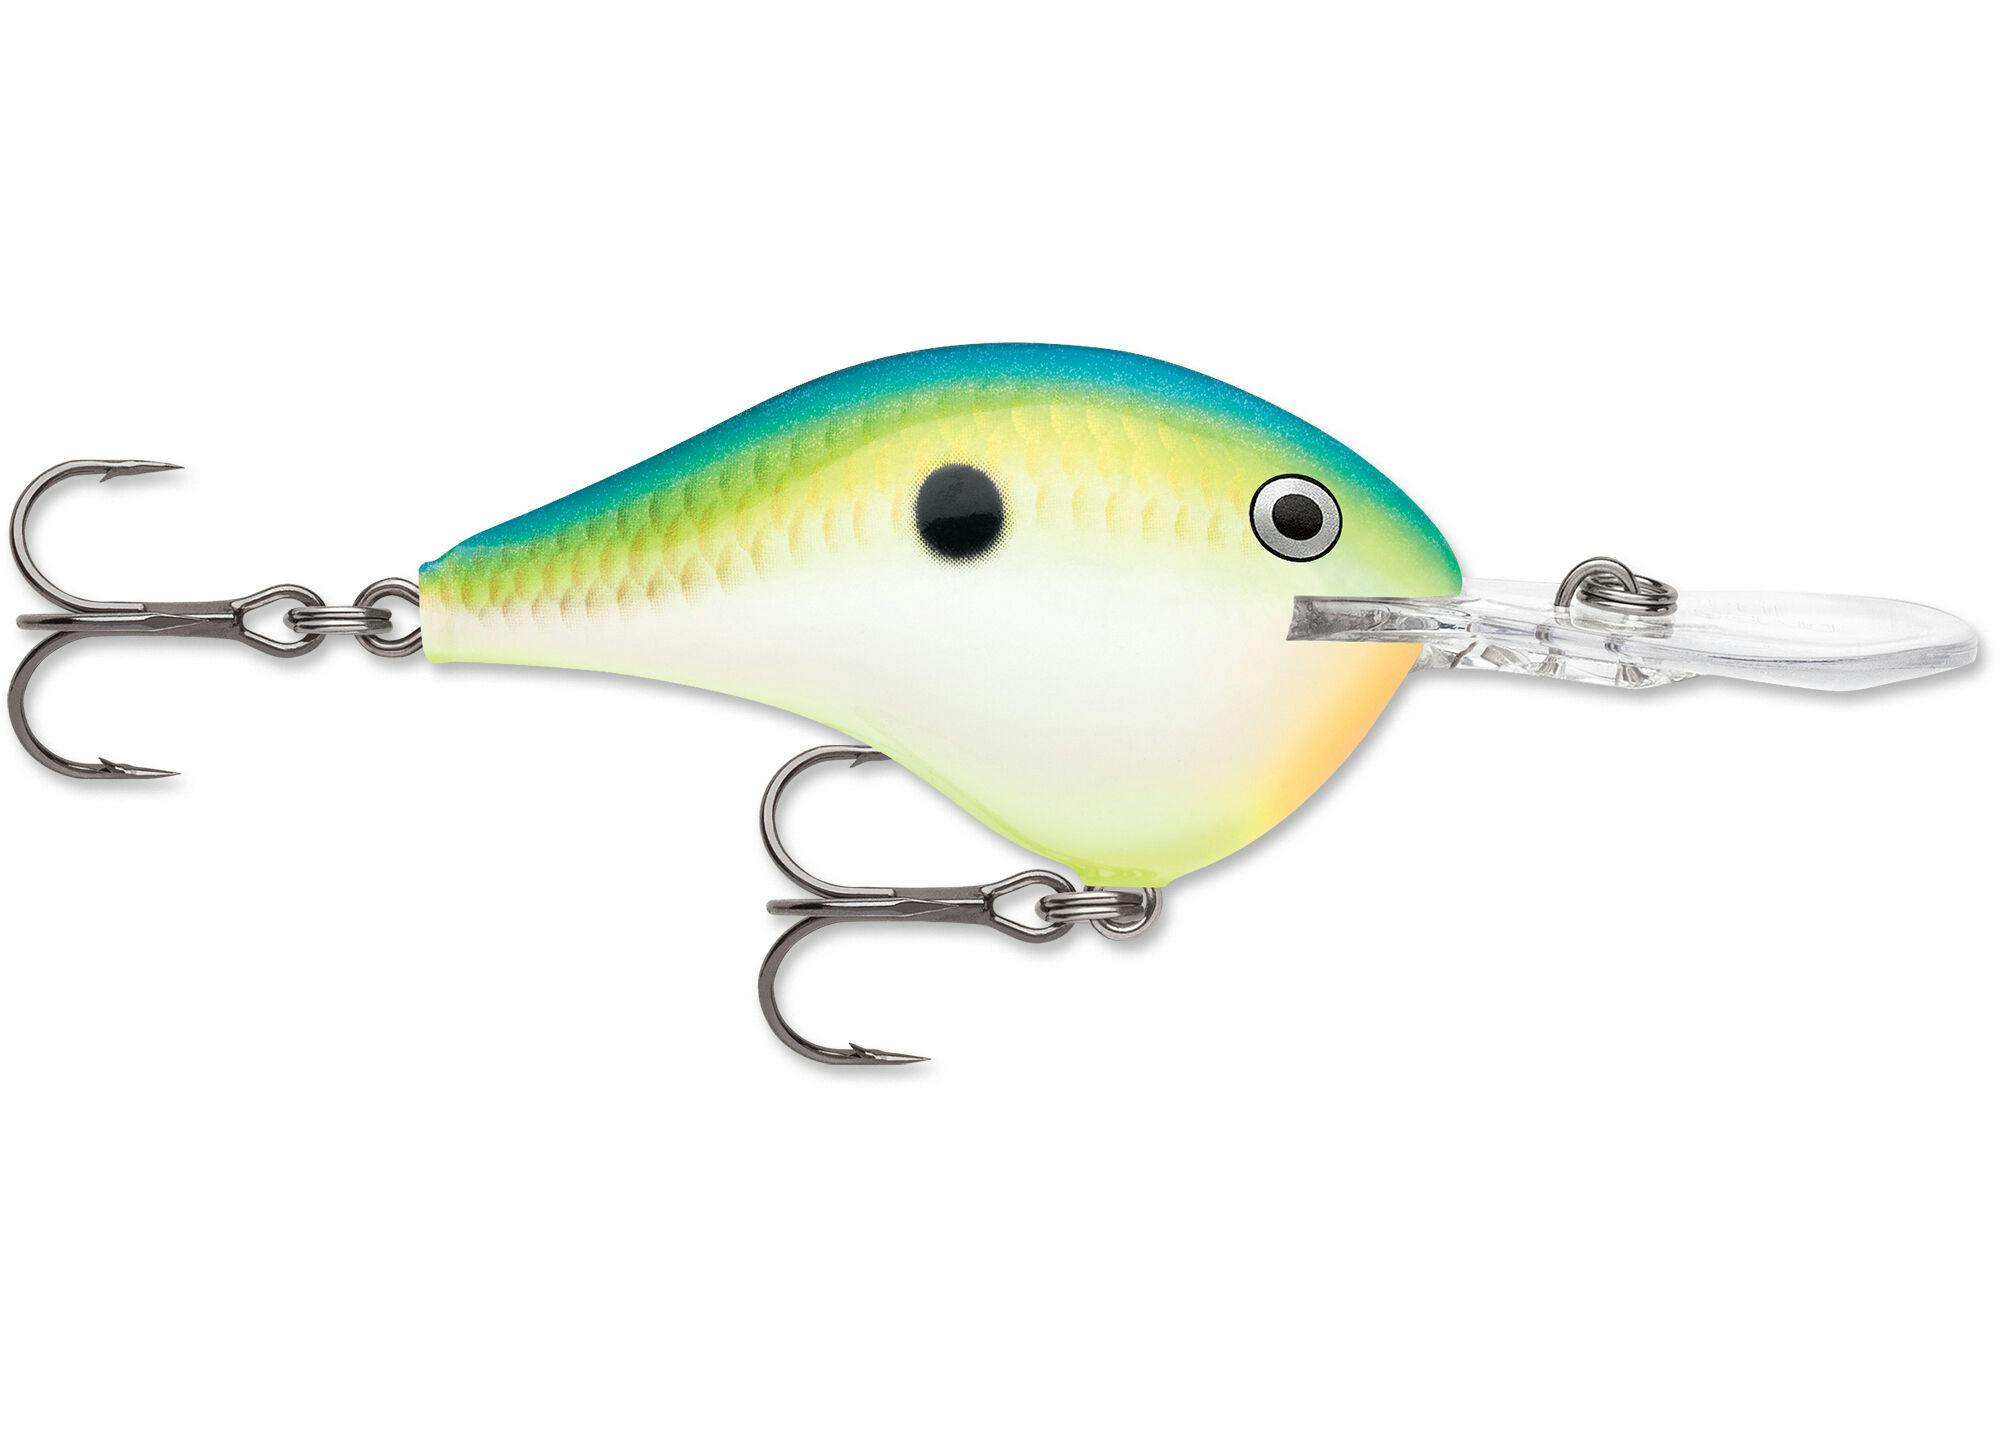 Rapala DT® (Dives To) Series · 2 1/4 in · 3/5 oz · Citrus Shad · 1 pk.